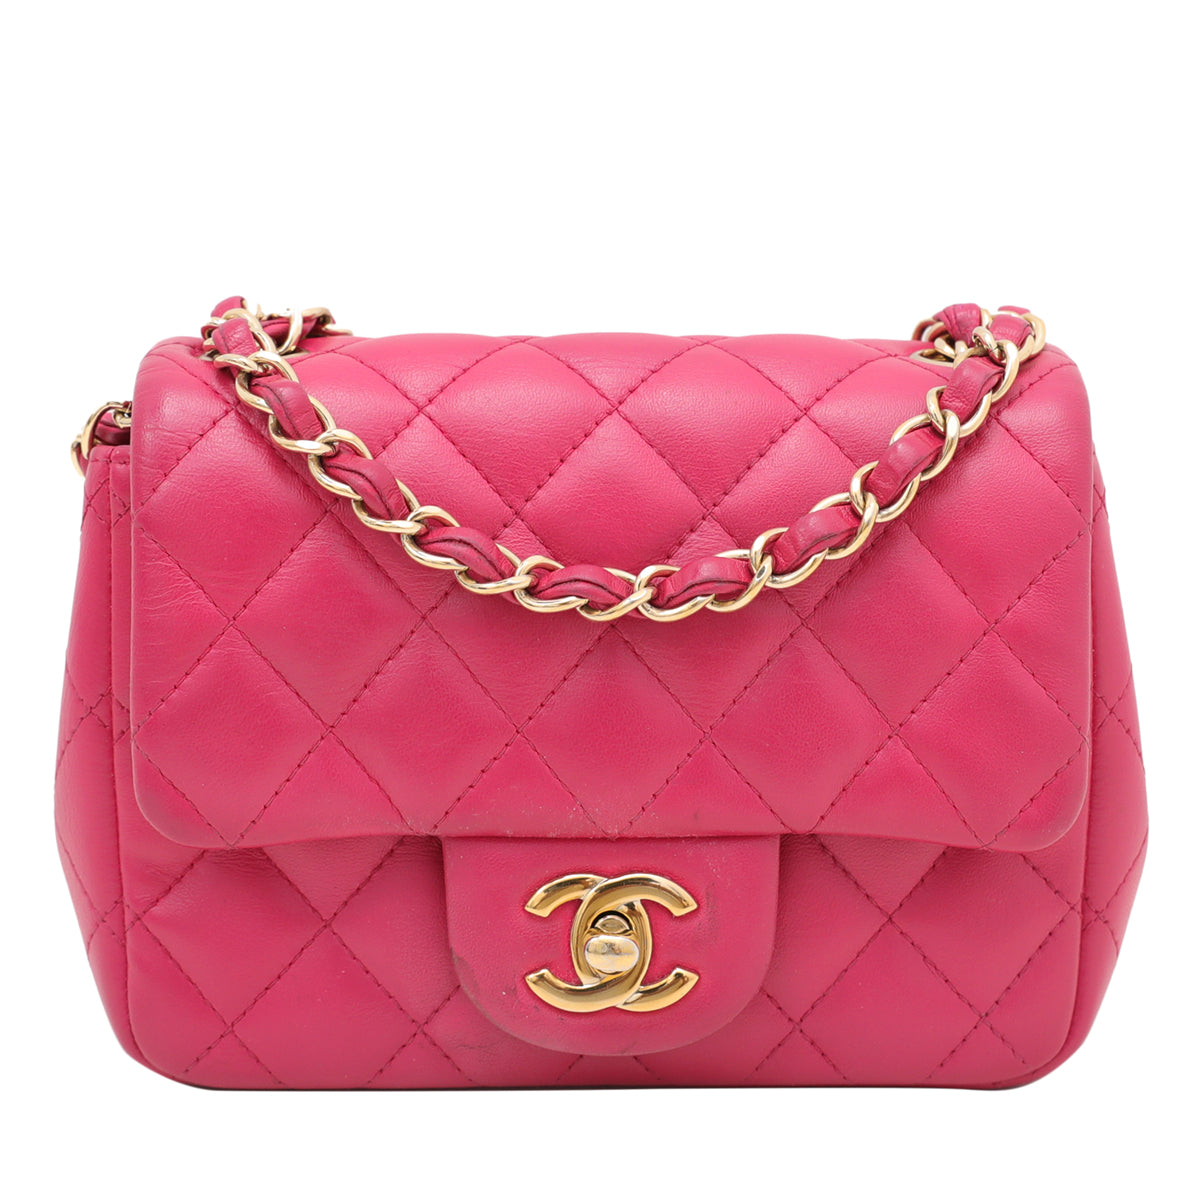 Chanel Pink, Black and Gold CC Classic Flap Bag Earrings